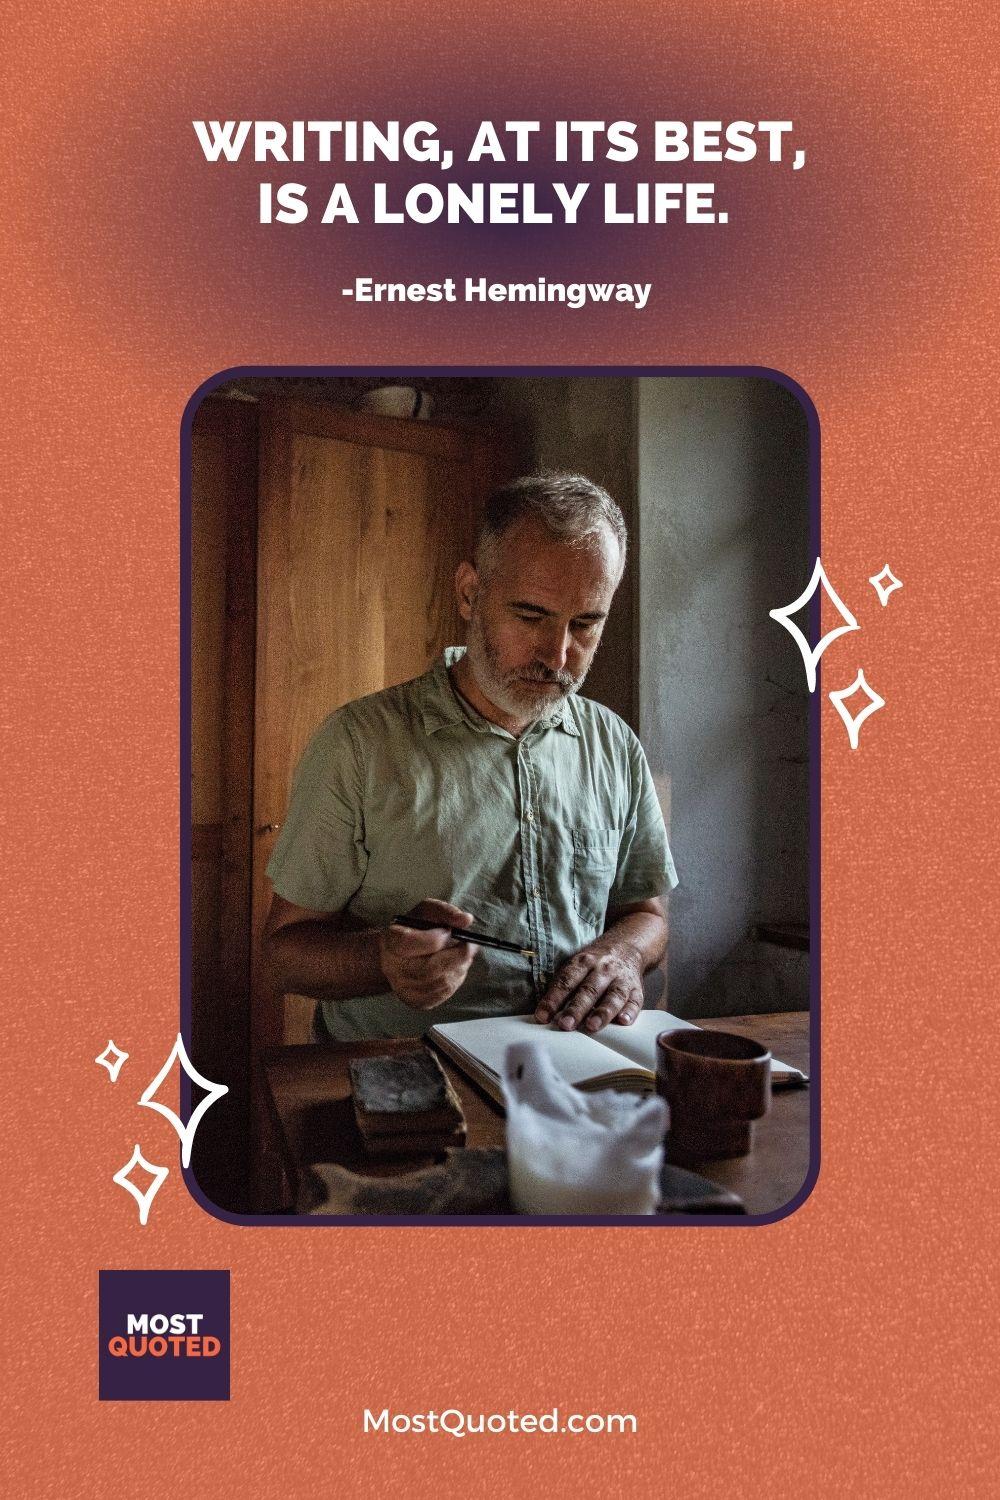 Writing, at its best, is a lonely life. - Ernest Hemingway